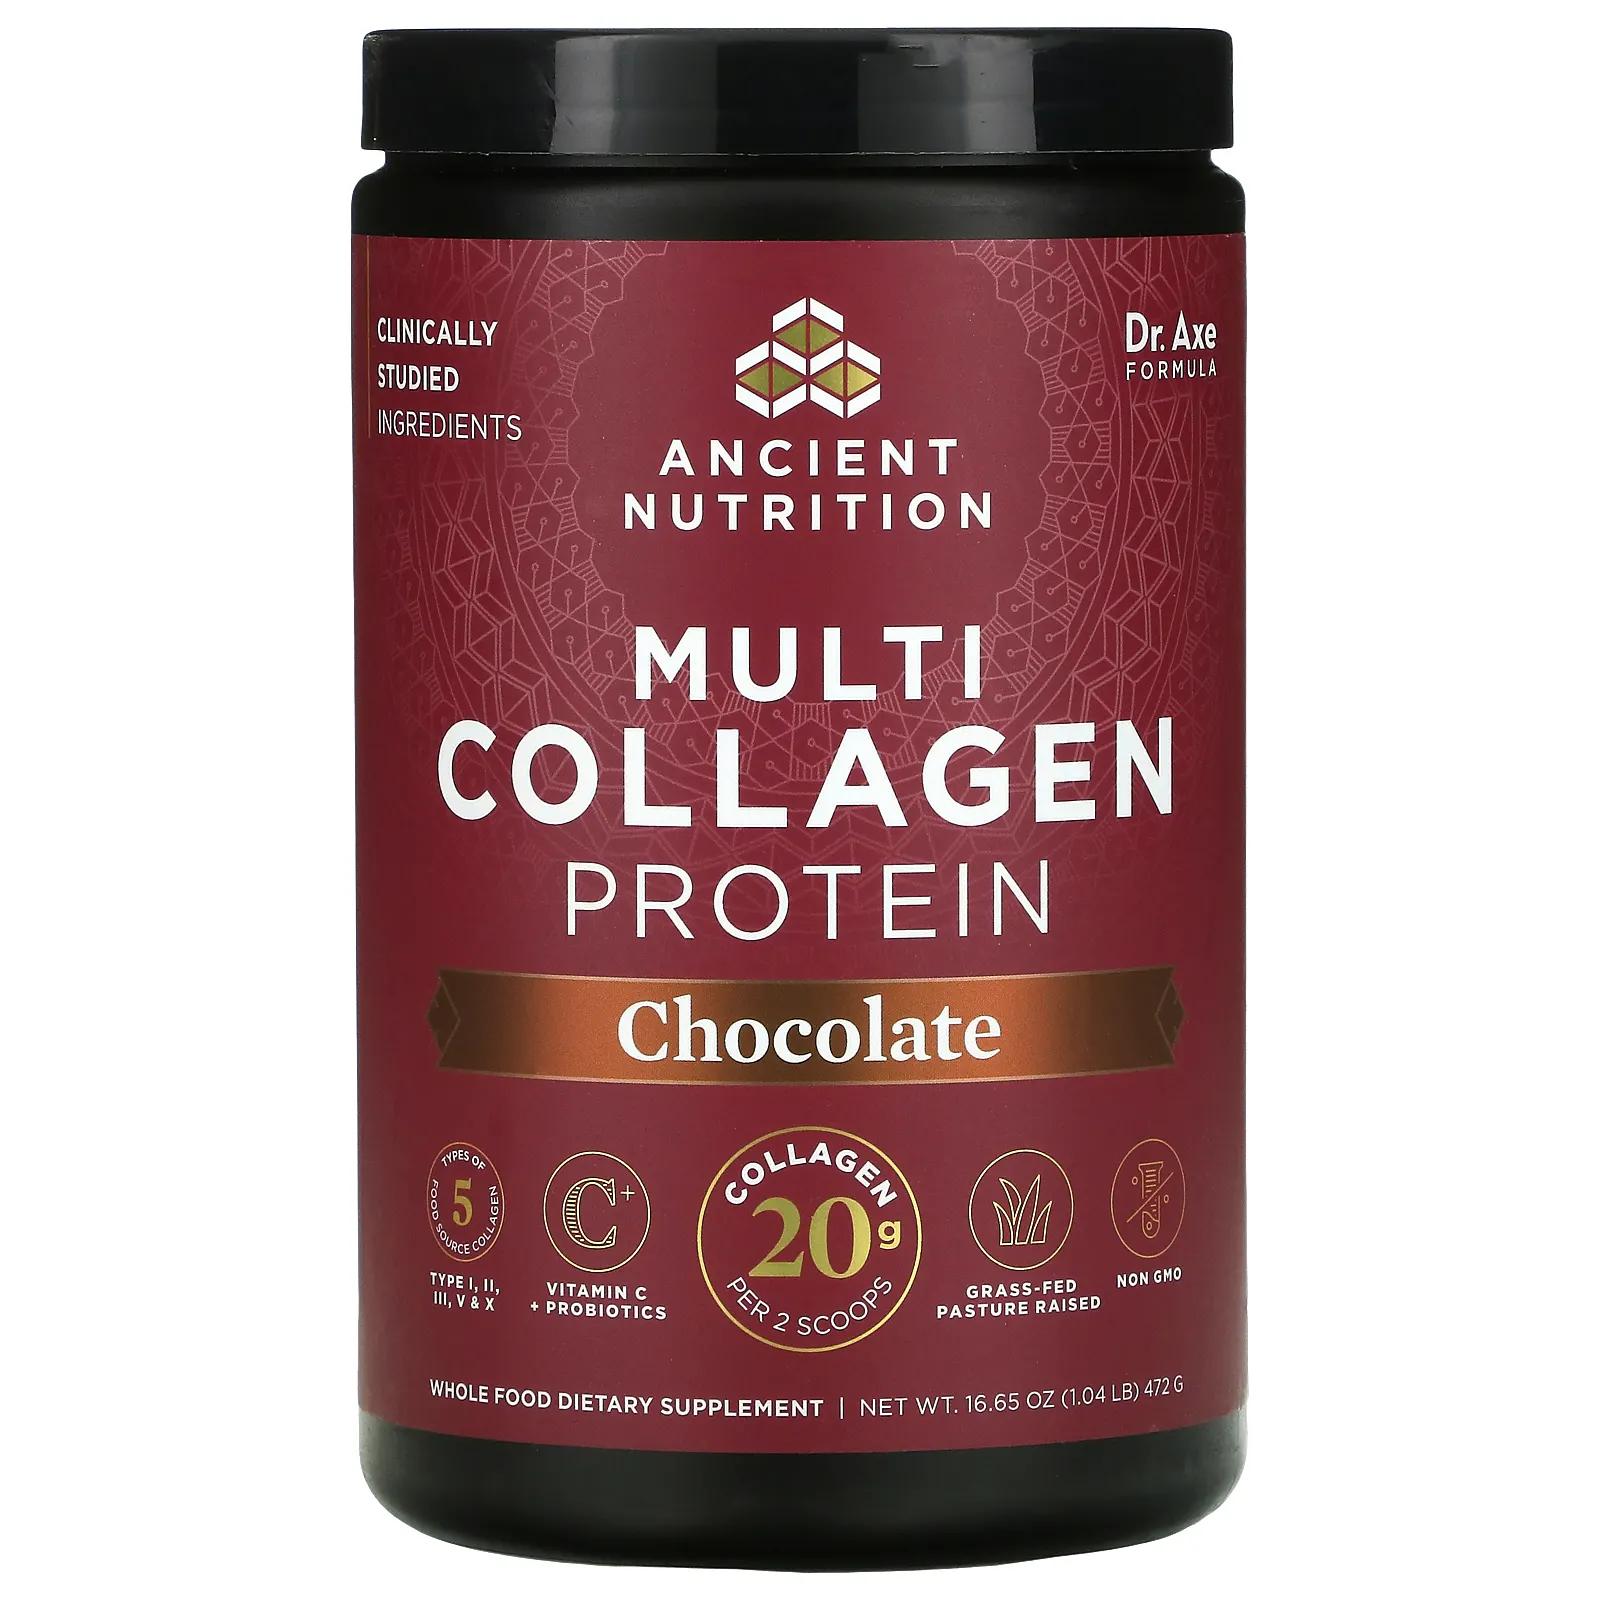 Dr. Axe / Ancient Nutrition Multi Collagen Protein Chocolate 18.5 oz (525 g) dr axe ancient nutrition multi collagen protein strawberry lemonade 1 18 lbs 535 5 g